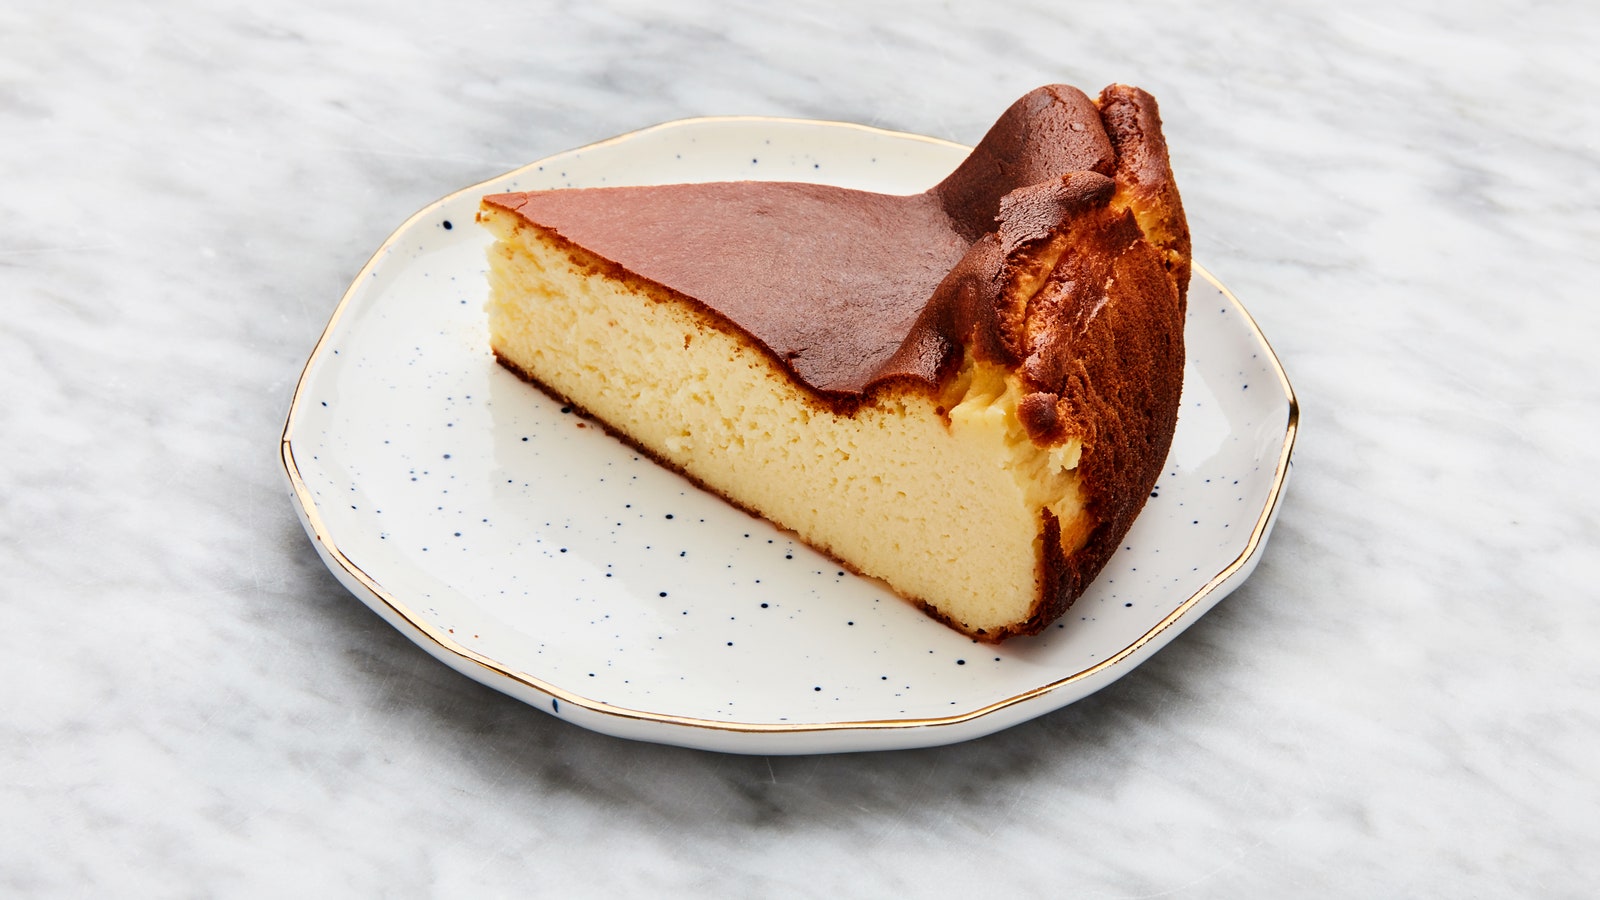 A slice of Basque cheesecake as seen from the side.